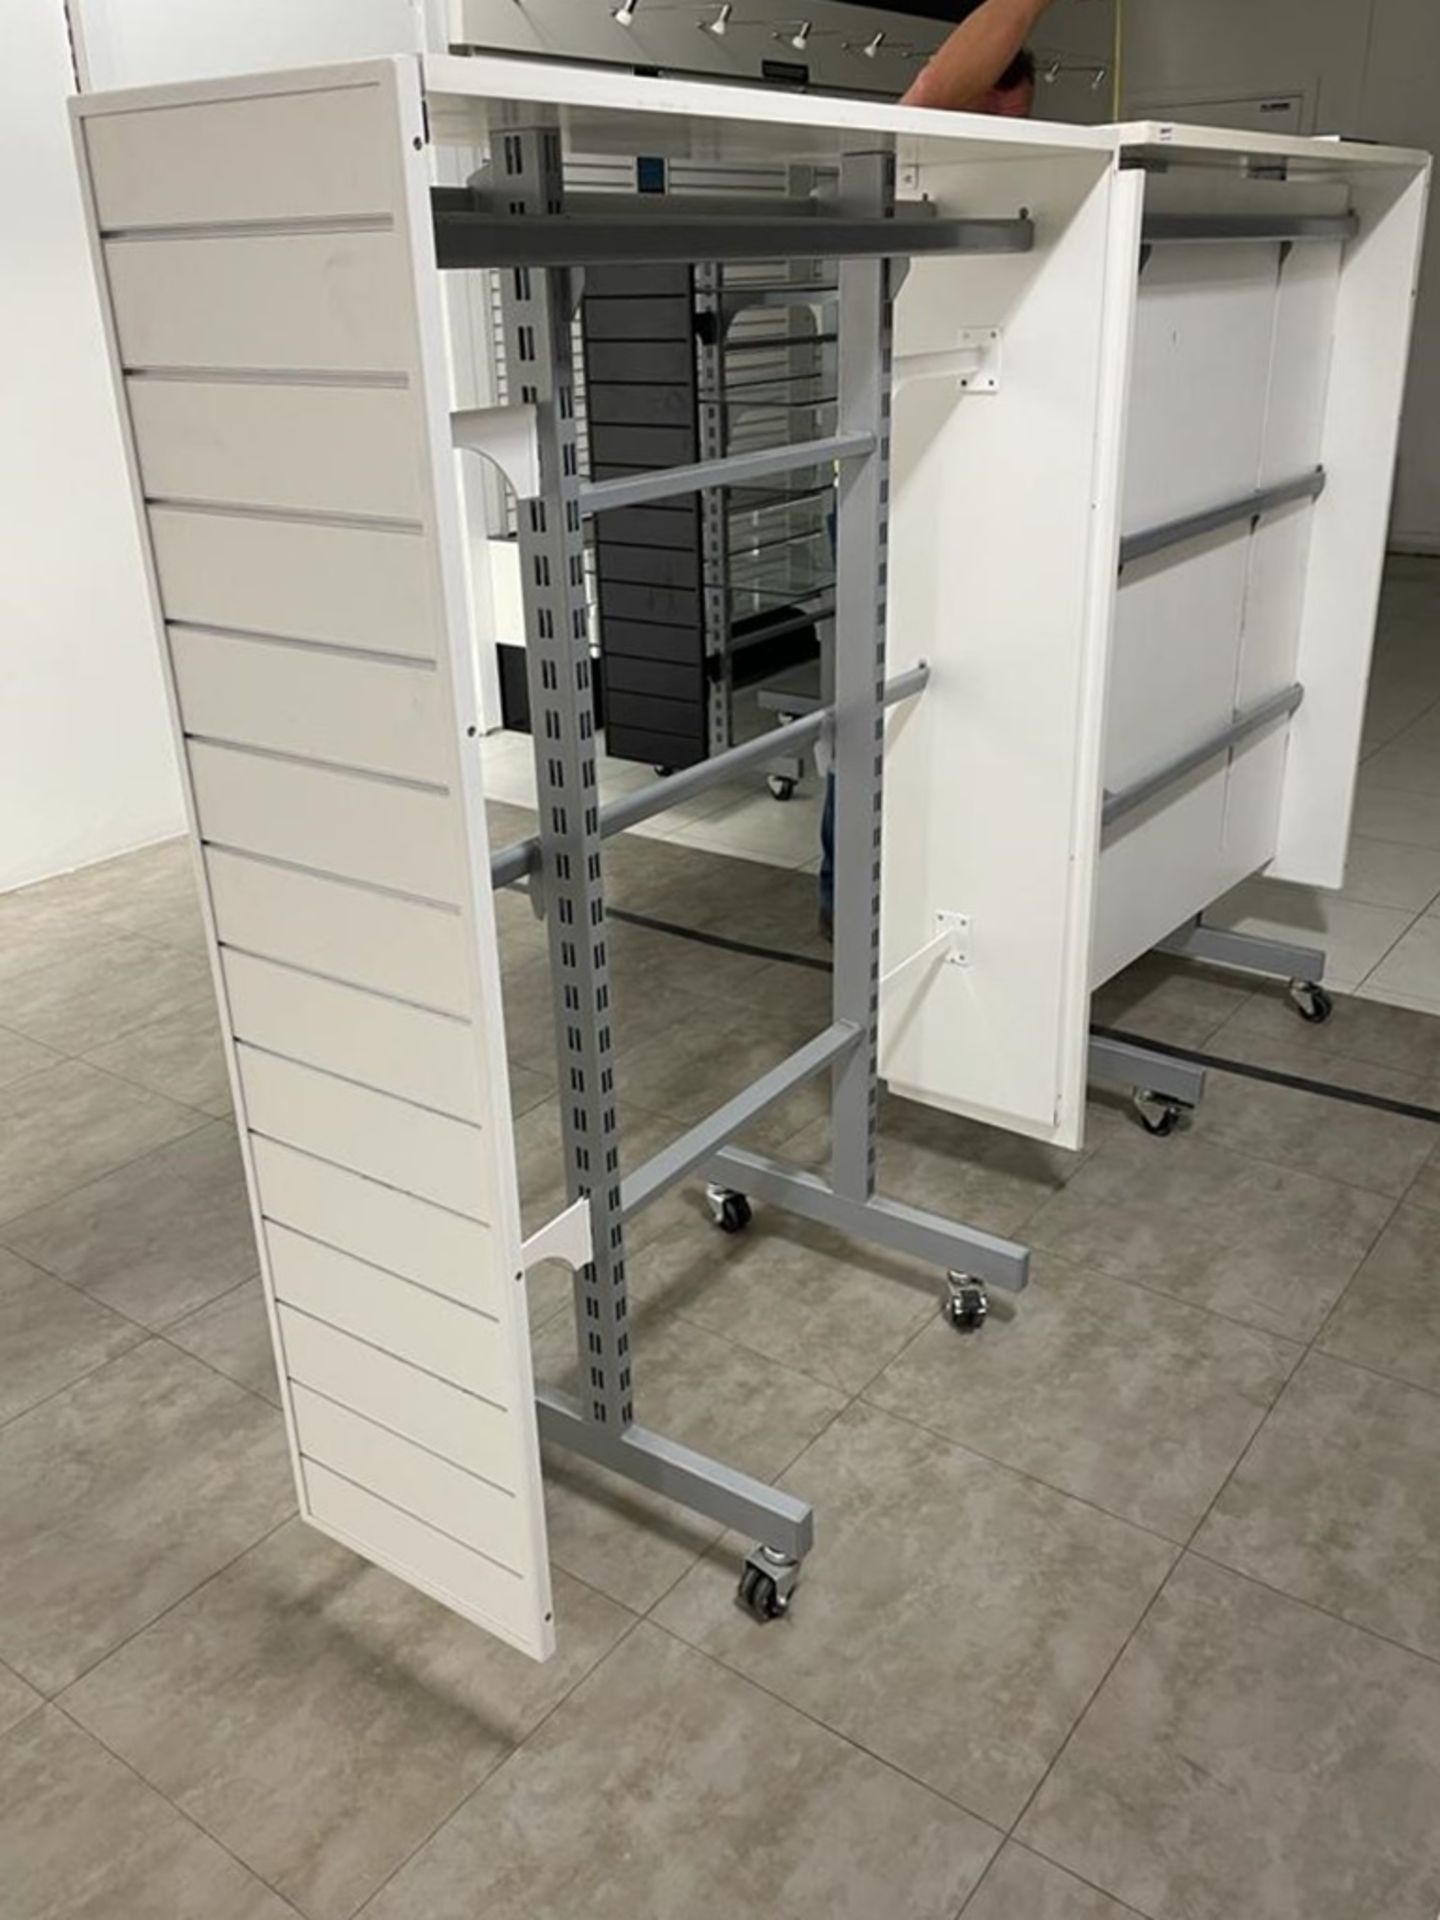 2 x Retail Display Units in White Featuring Clothes Rails, Slat Walls and Castor Wheels - Size - Image 5 of 5